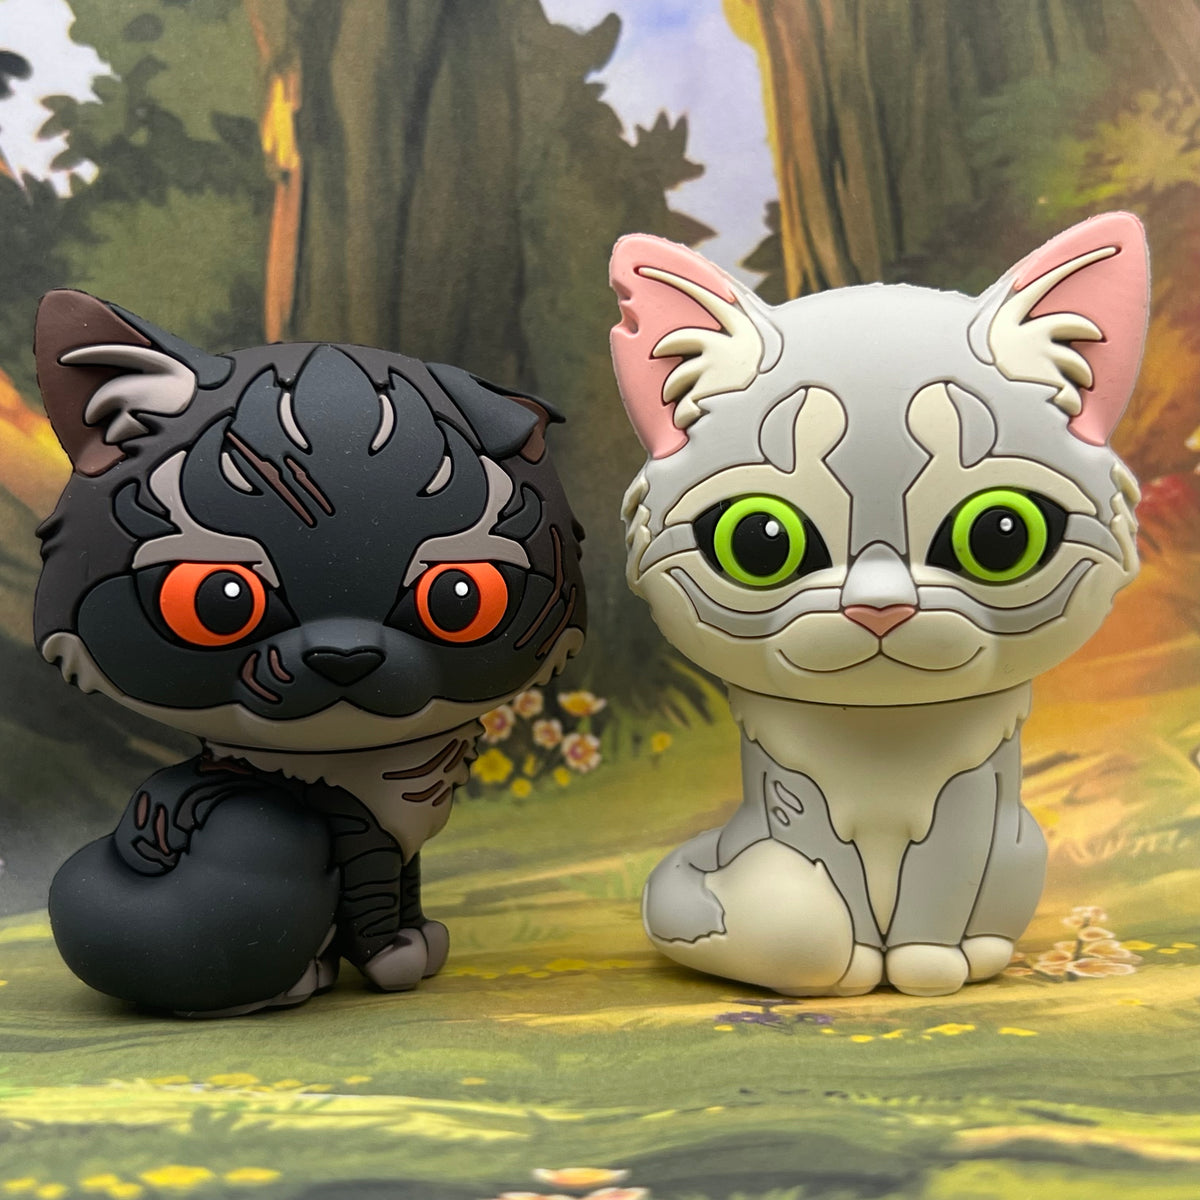 Shadowsight &amp; Dovewing - Mini Collector Figures (Series 6)